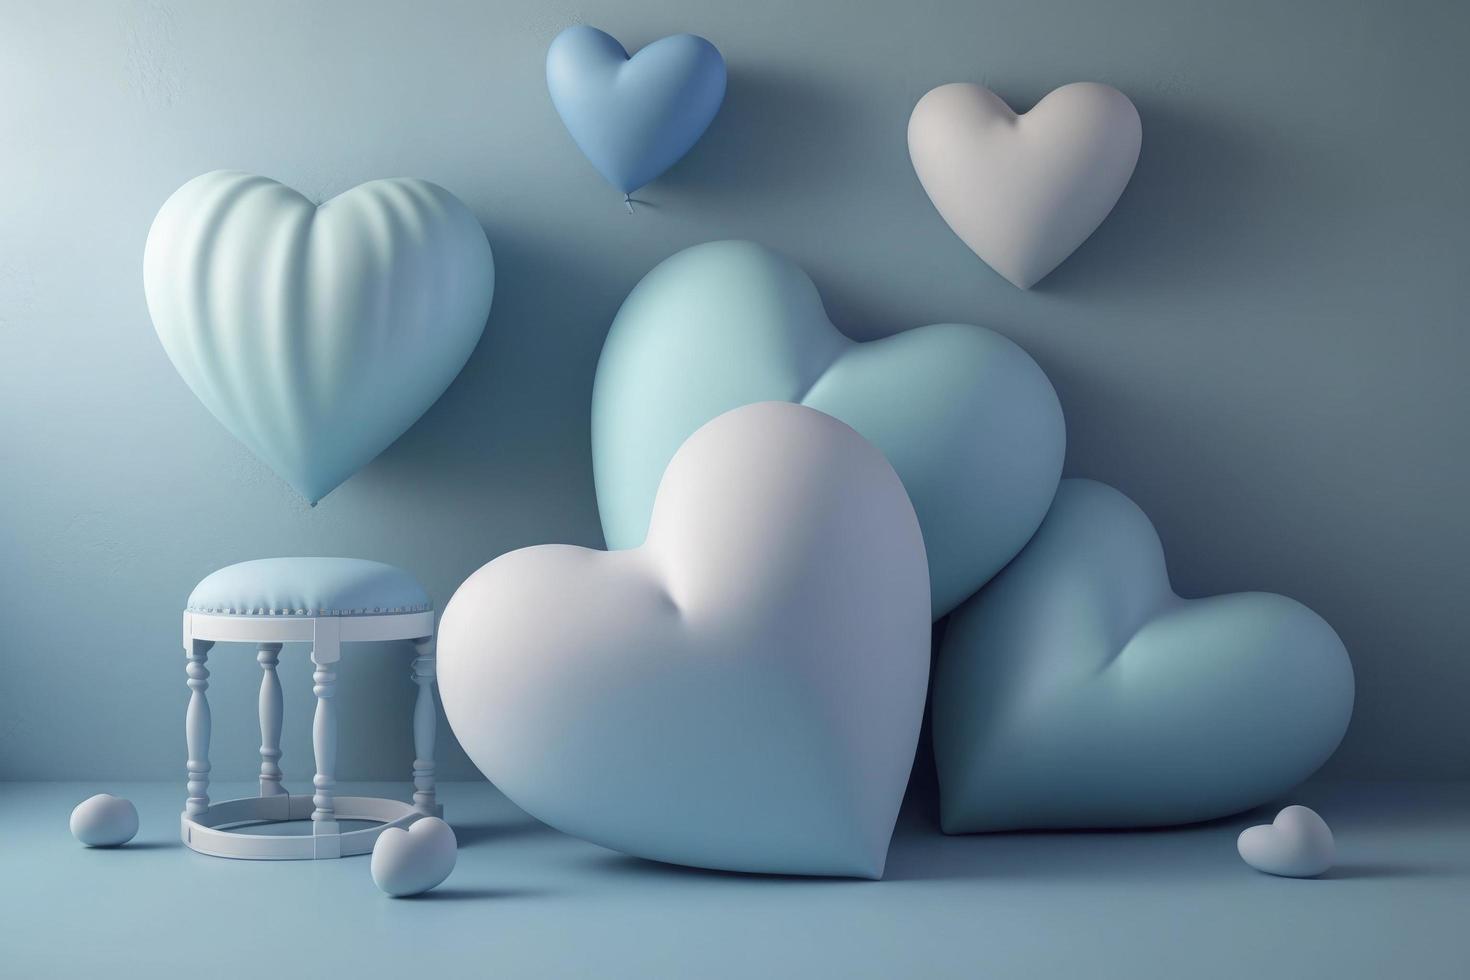 Cute pastel blue heart balloons, cushion background, 3d rendering hearts, white day, baby shower, gender reveal photo